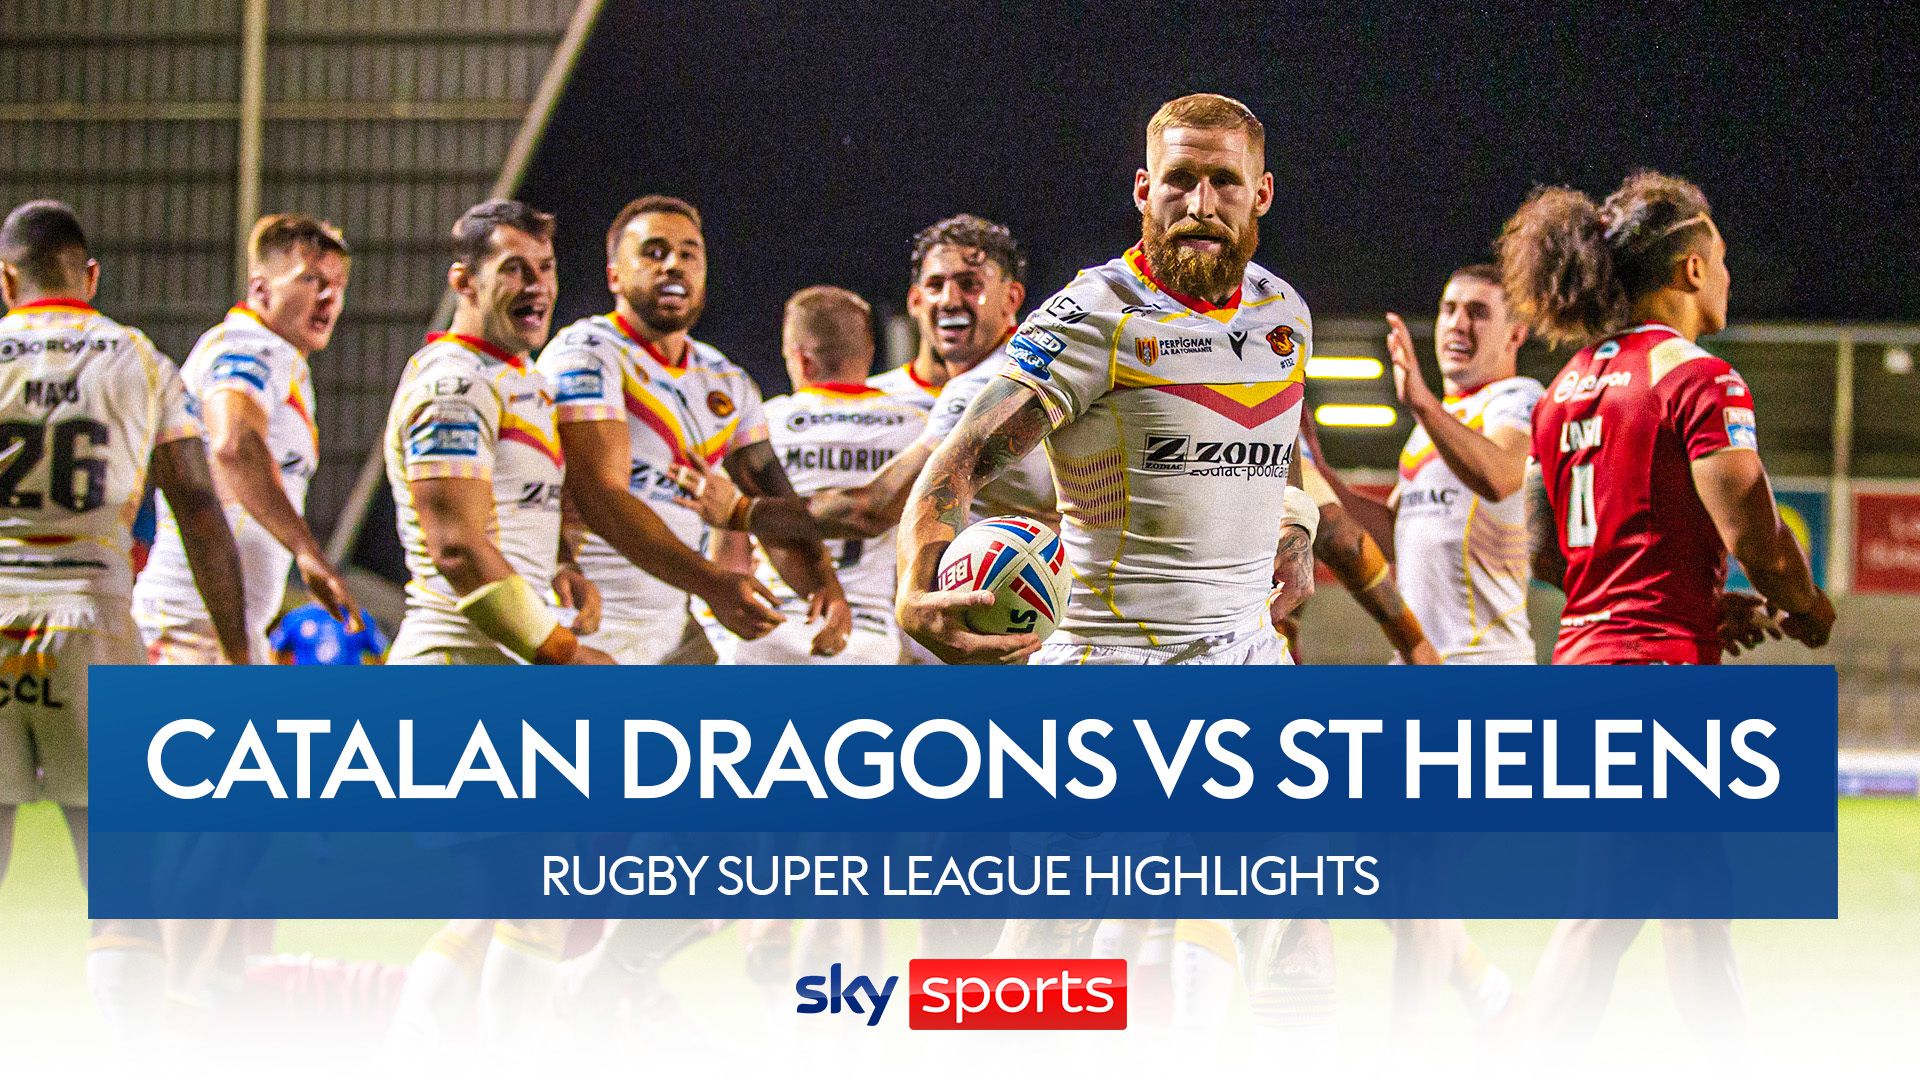 Highlights: Tomkins' dramatic try sends Catalans to Grand Final